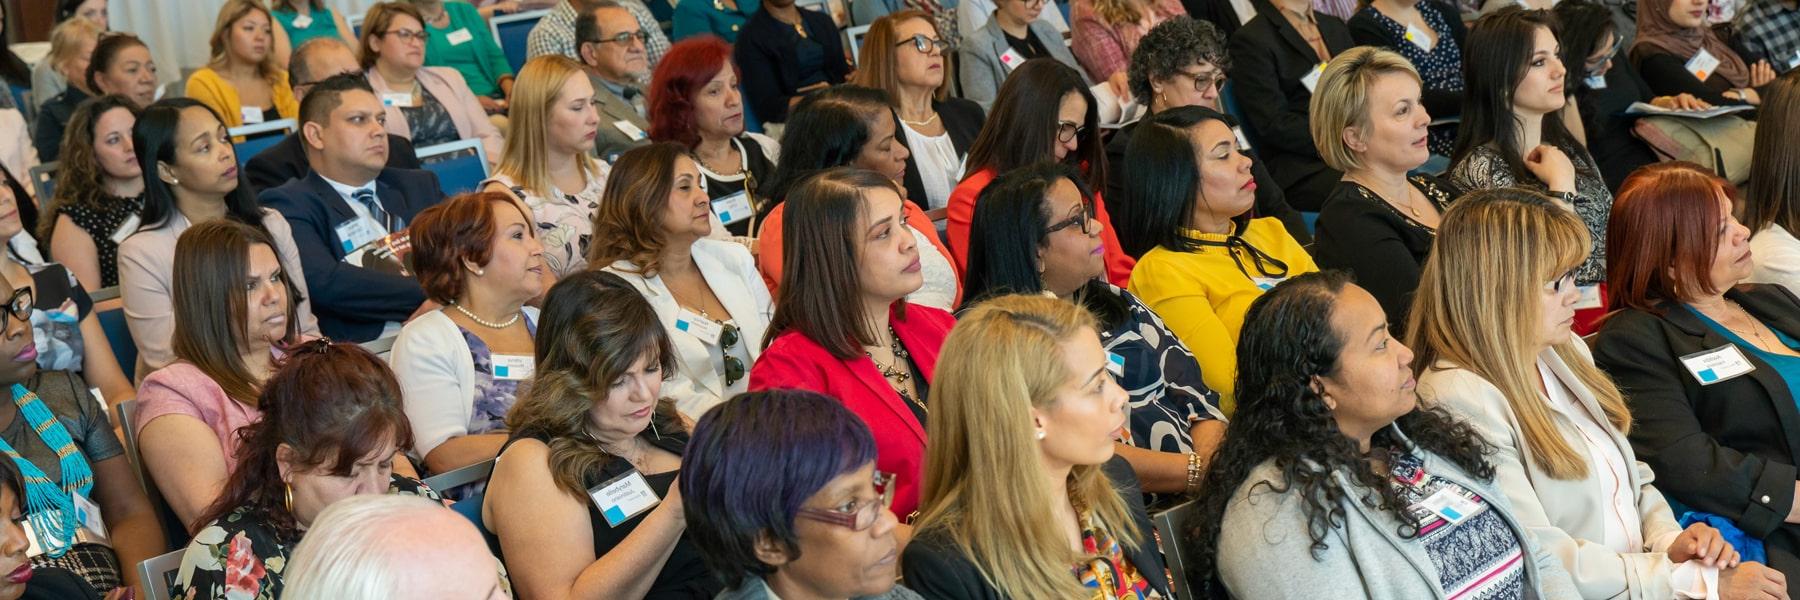 diverse audience in age, gender and ethnicity sitting at a conference